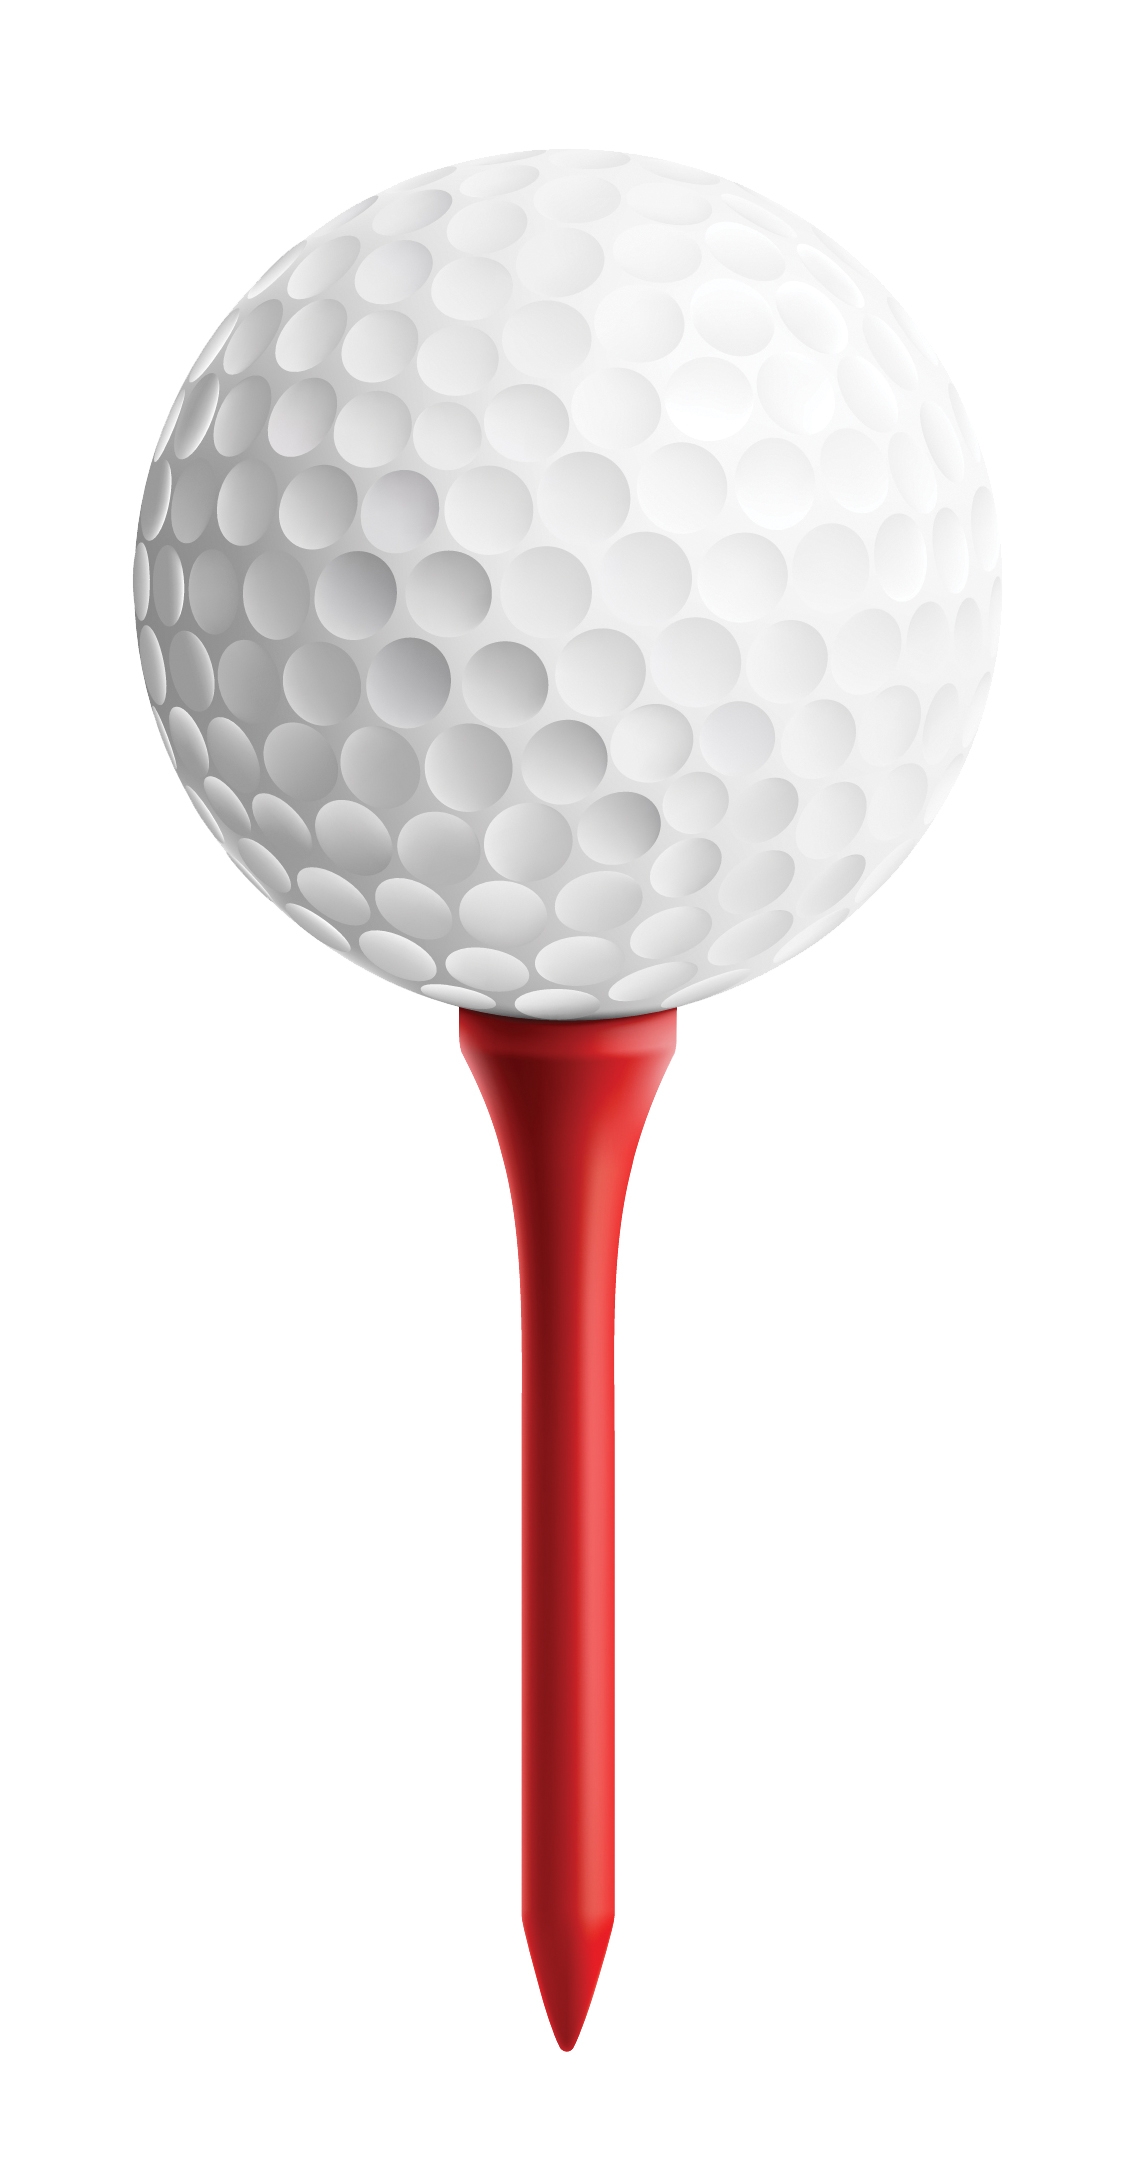 Free Golf Tee Cliparts, Download Free Clip Art, Free Clip